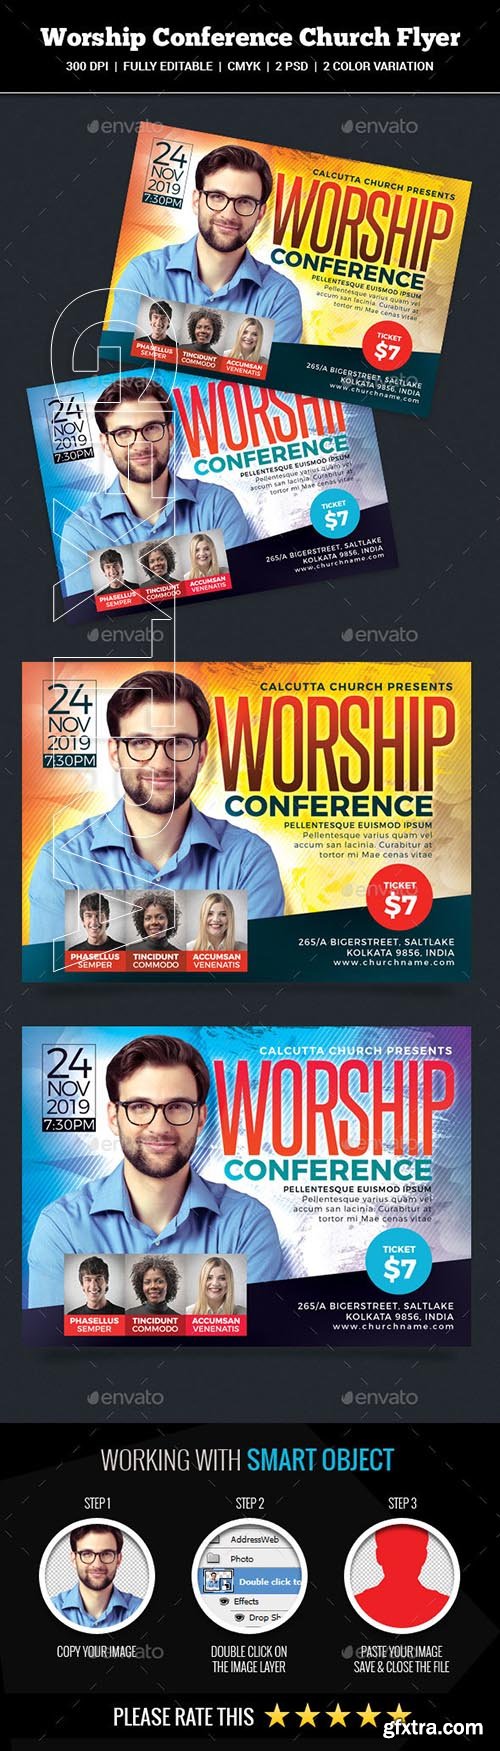 GraphicRiver - Worship Conference Church Flyer 22337102